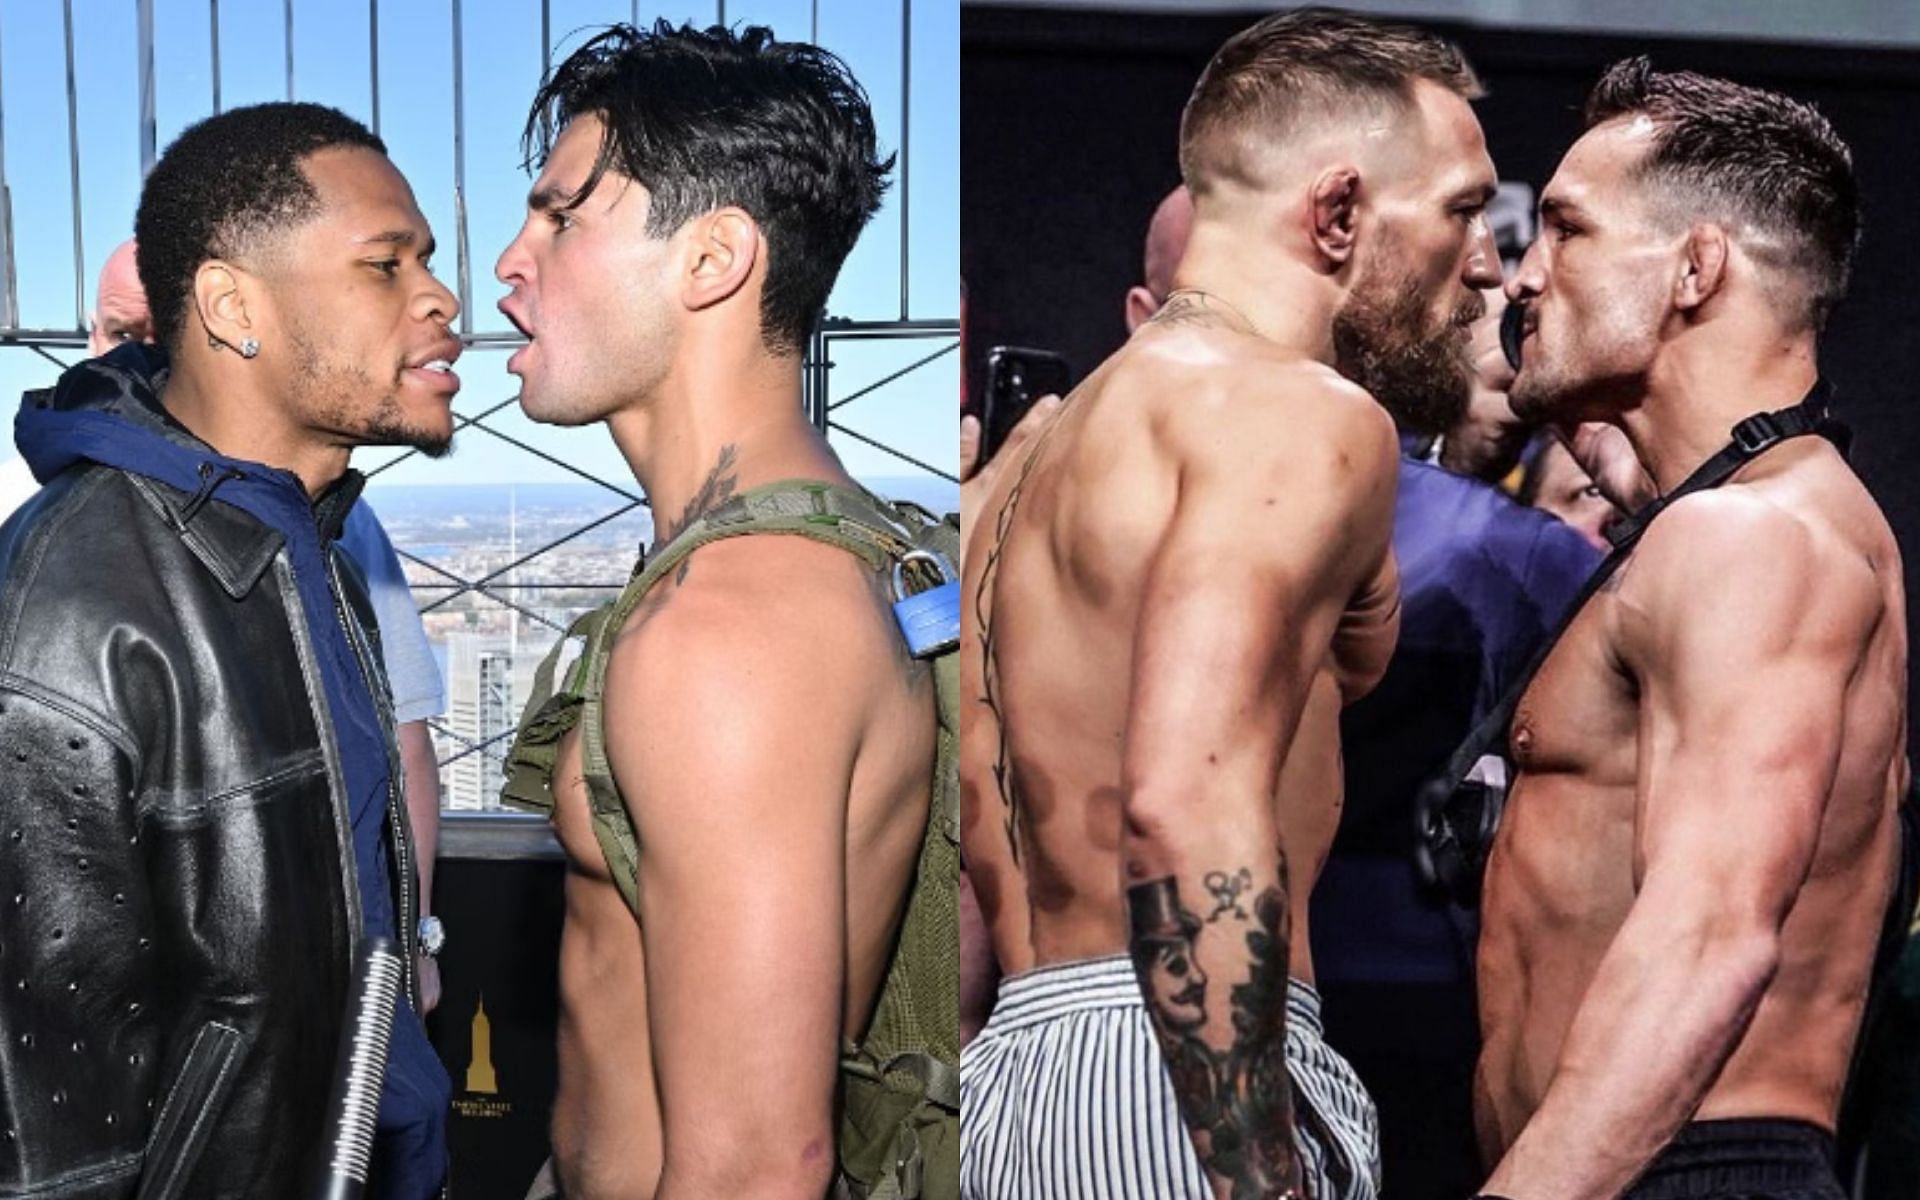 Devin Haney &amp; Ryan Garcia (left), Conor McGregor &amp; Michael Chandler (right) [Images courtesy of Getty Images &amp; @mikechandlermma on Instagram]